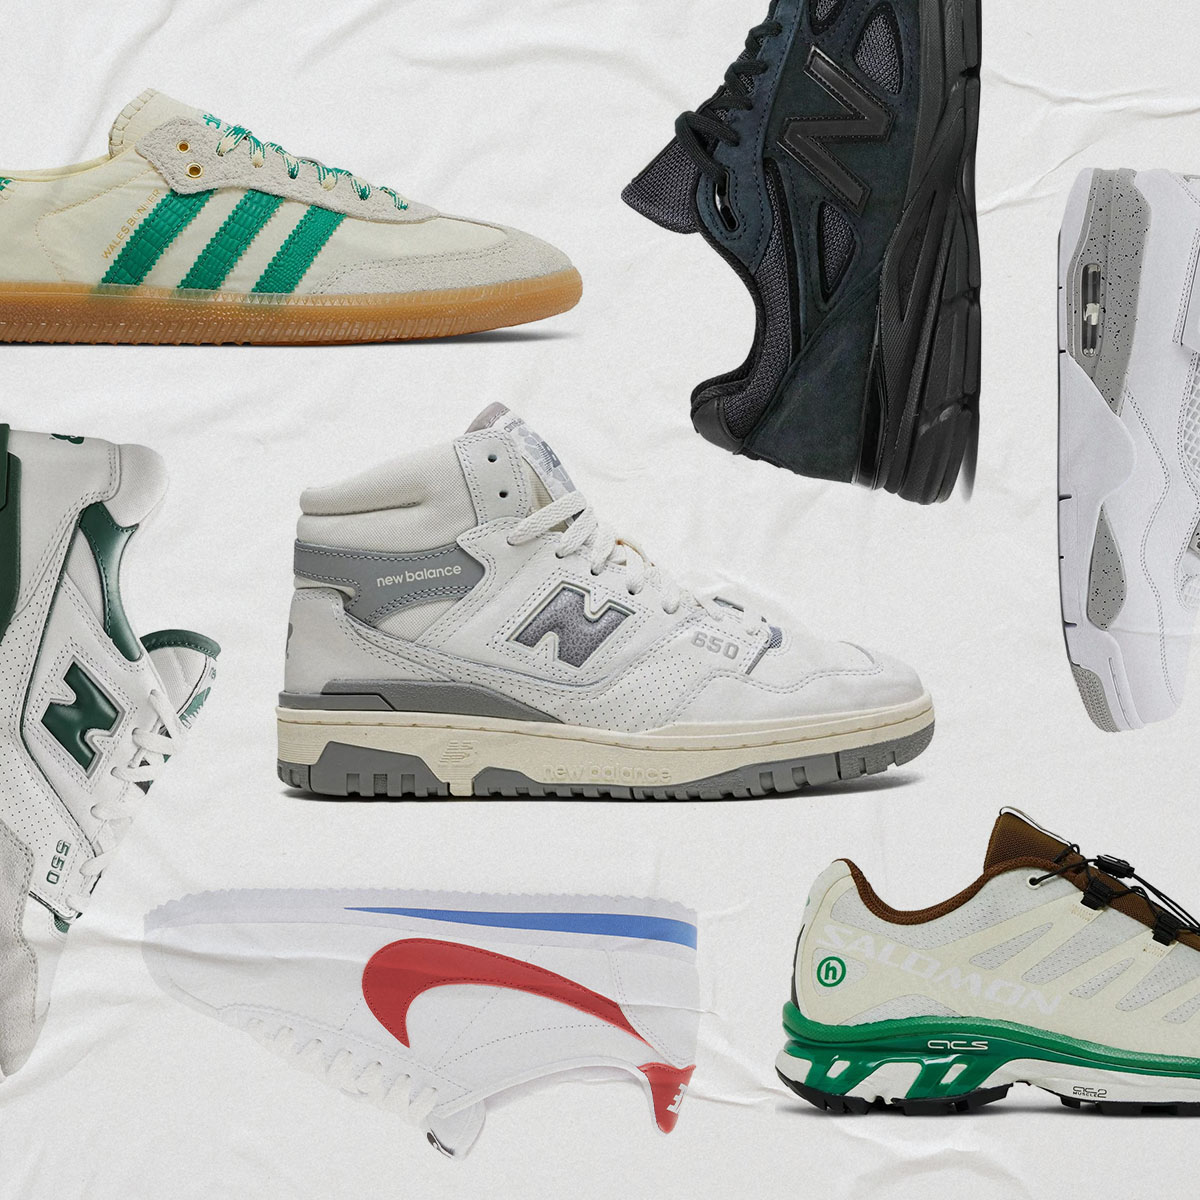 4 Sneaker Trends to Know In 2023, According to Experts